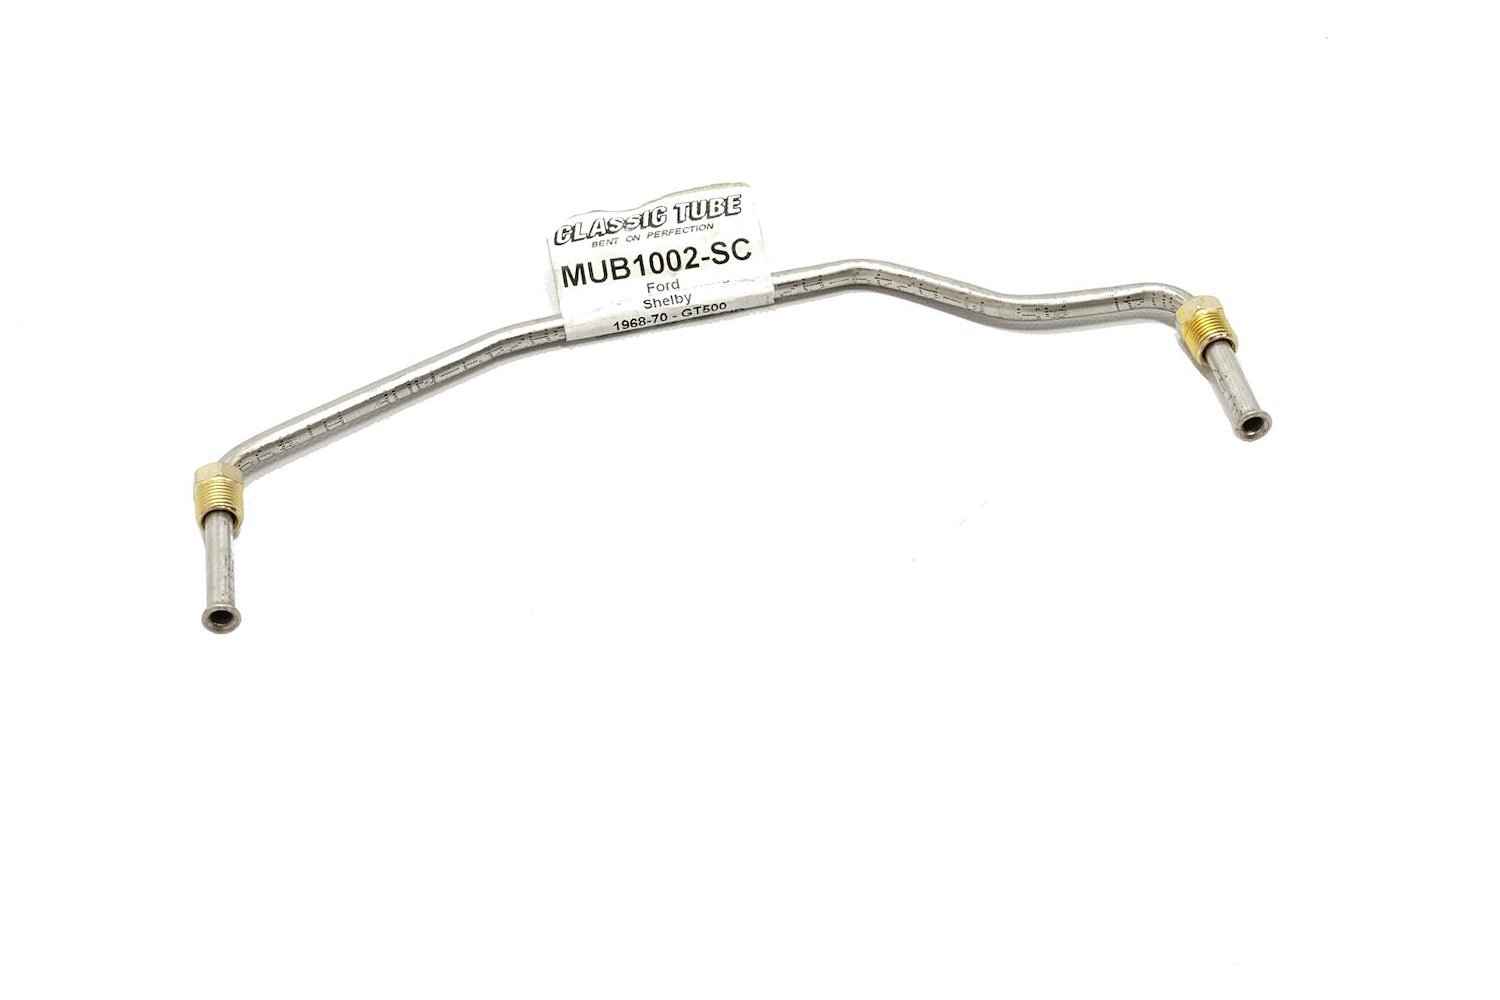 Ford Mustang Bowl to Bowl Fuel Transfer Tube -1968 1969 1970